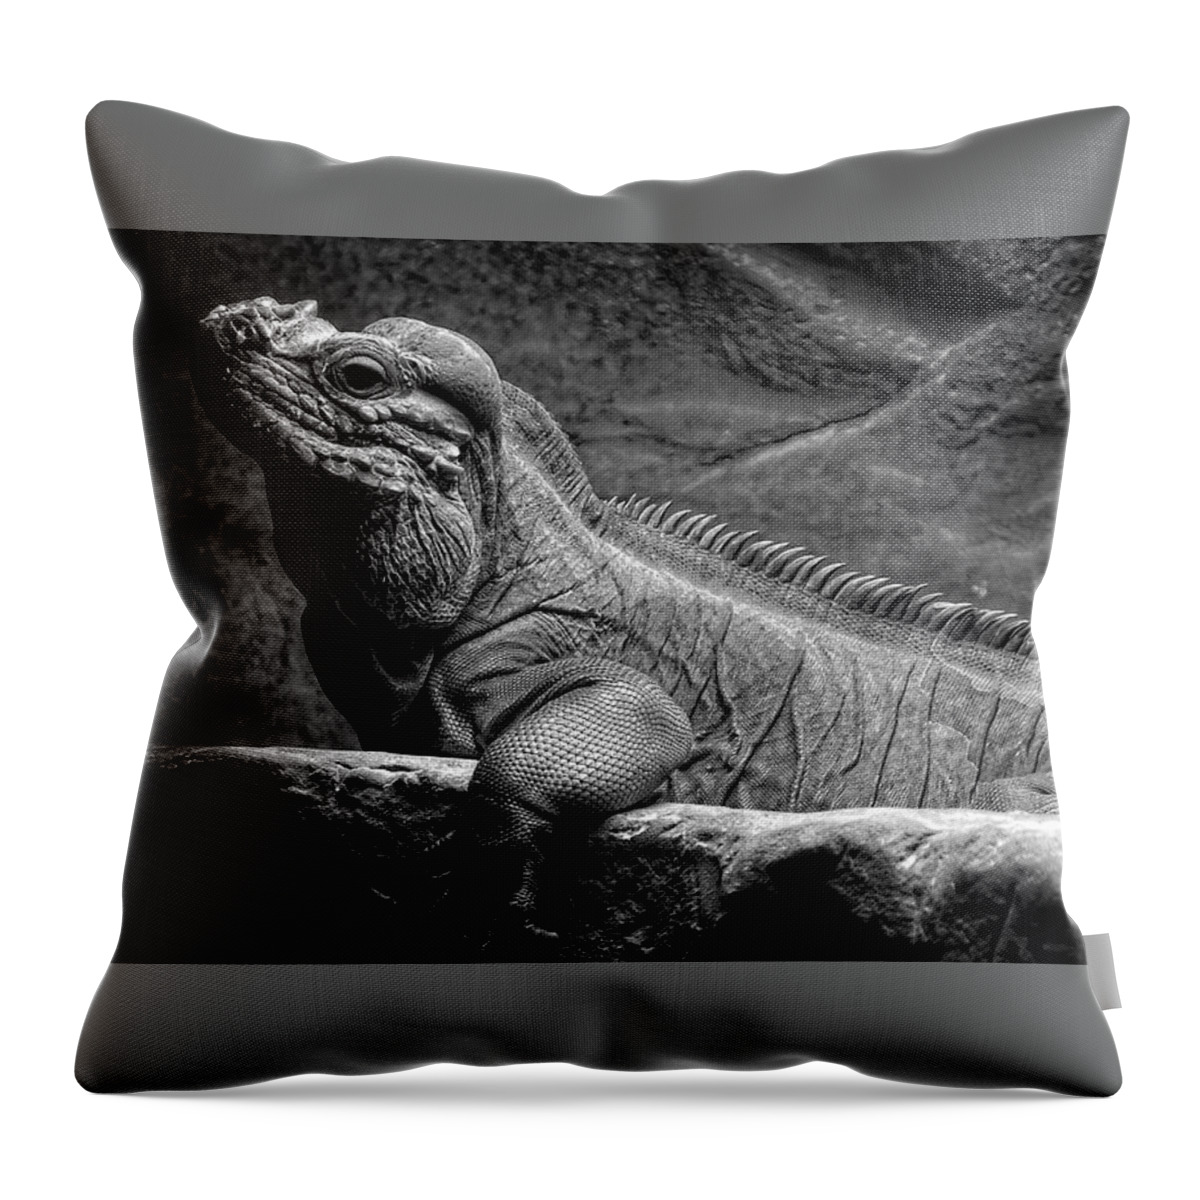 Lizard Throw Pillow featuring the photograph I'm Cool How About You by George Taylor